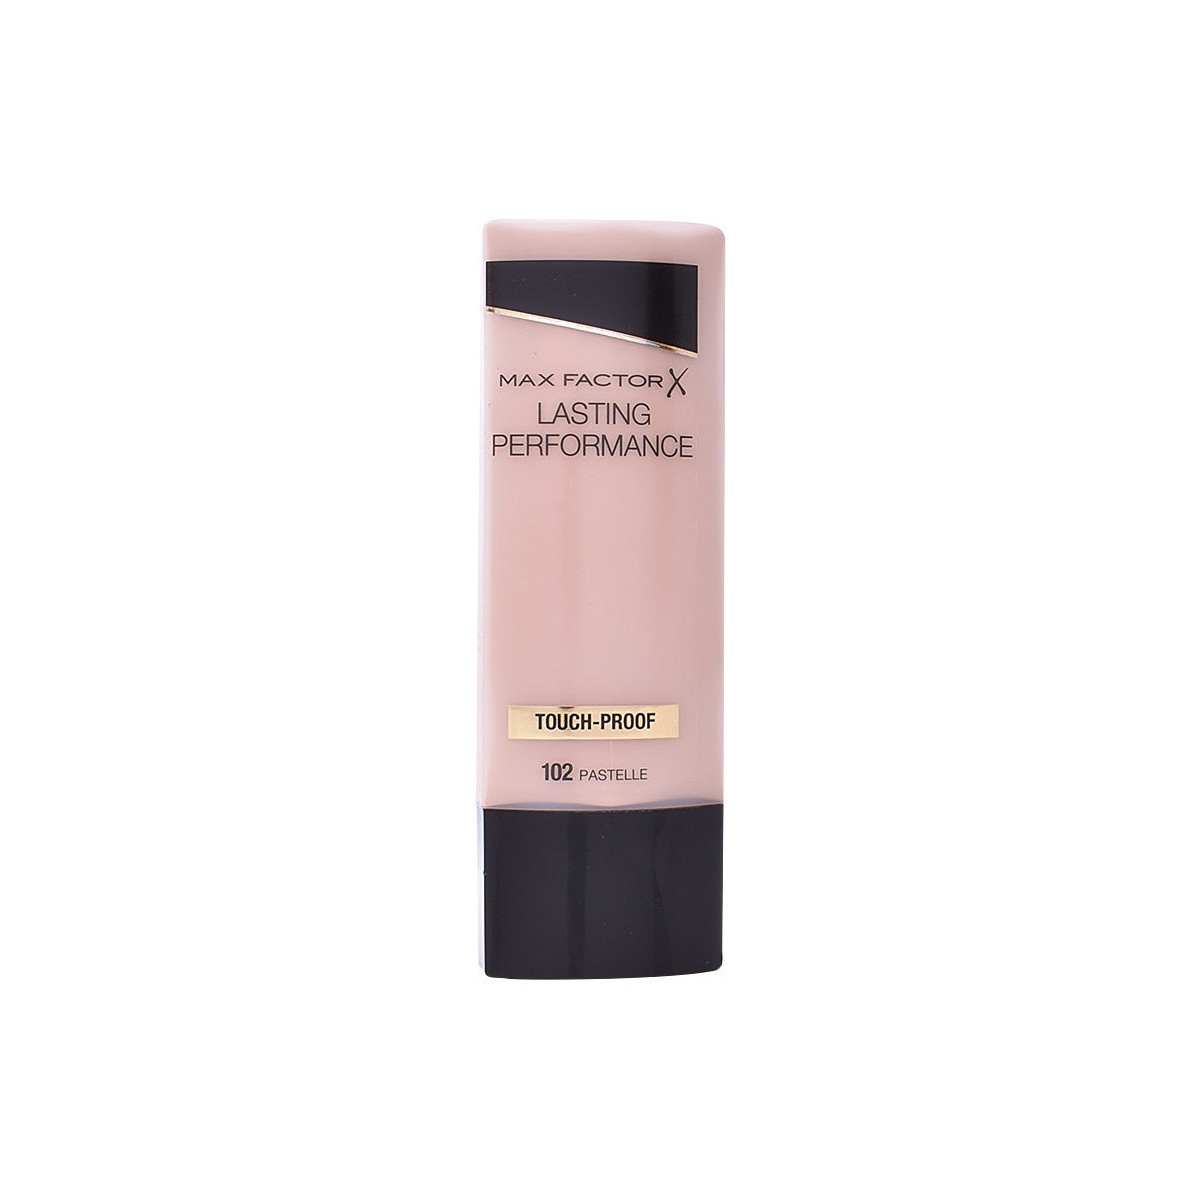 Belleza Base de maquillaje Max Factor Lasting Performance Touch Proof 102-pastelle 